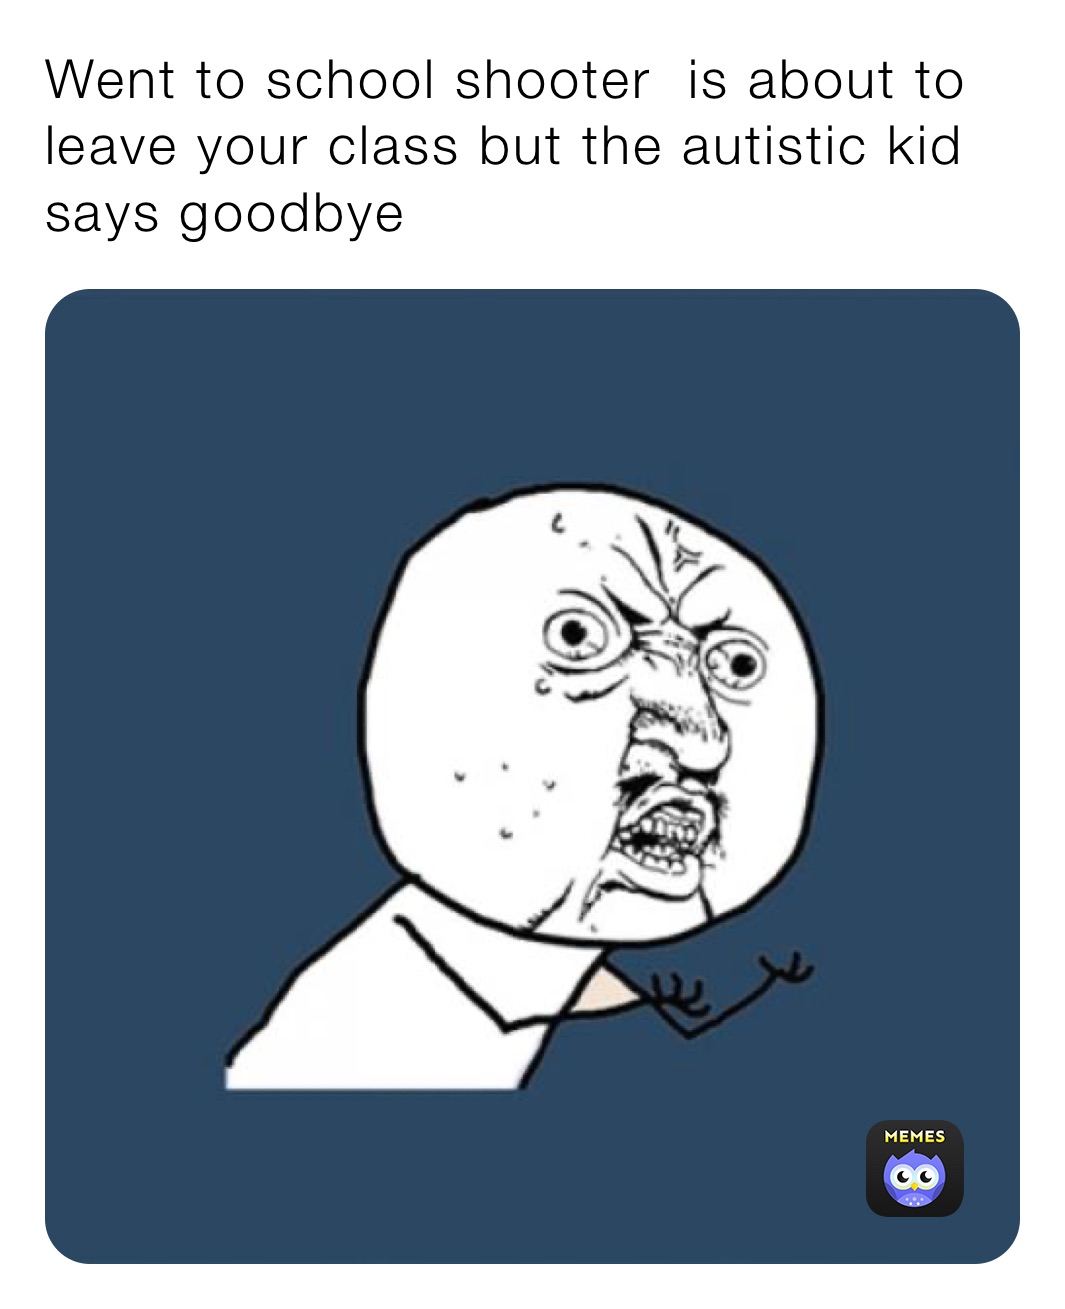 Went to school shooter  is about to leave your class but the autistic kid says goodbye￼